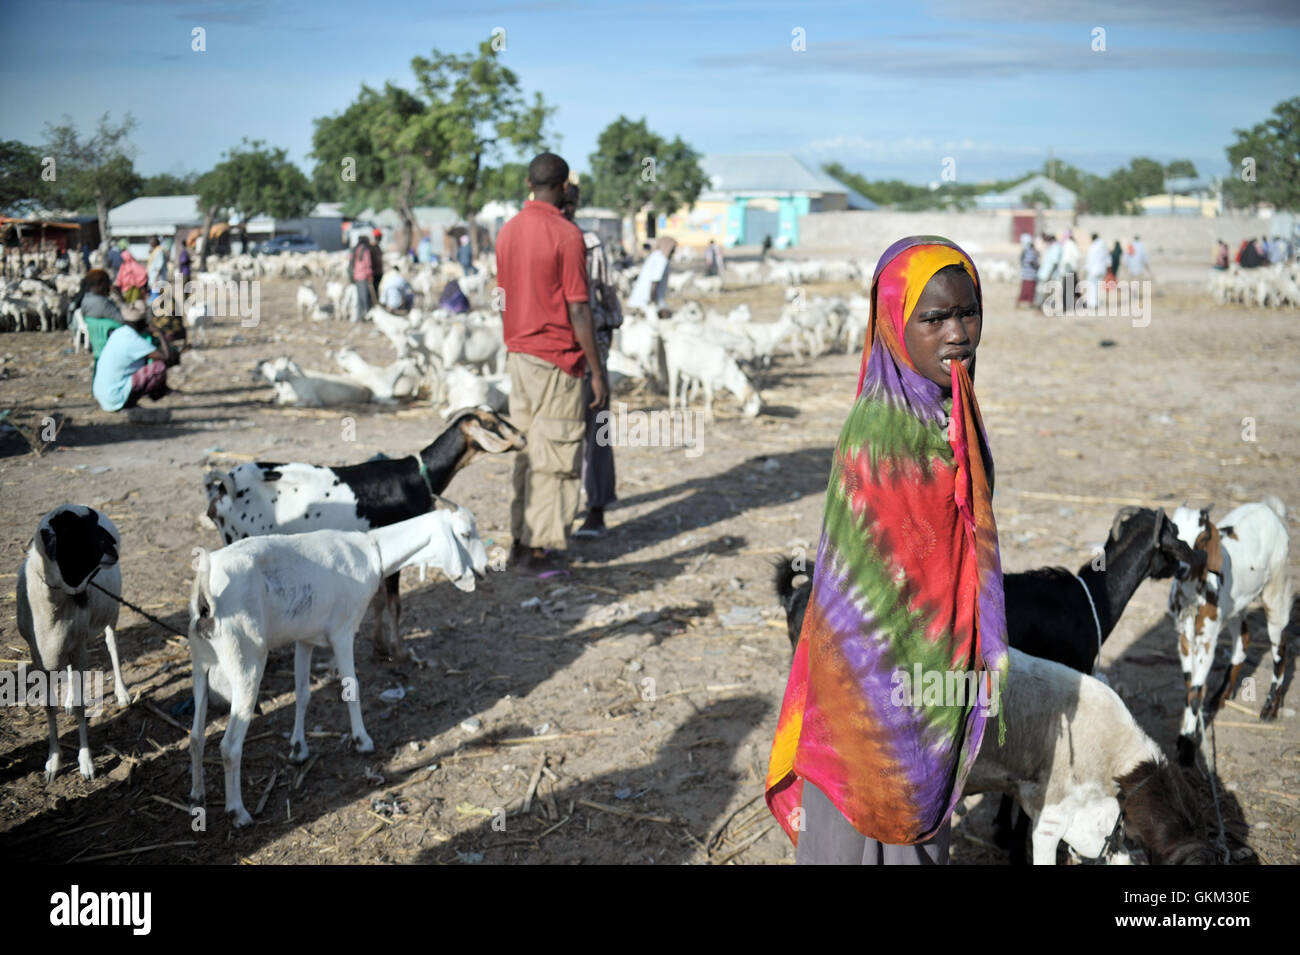 A Somali girl stands watch over a herd of goats at Bakara Animal Market in Mogadishu, Somalia, on April 13. Once notorious for being both the site of Black Hawk Down, in which 18 American soldiers were killed in 1993, and later as an al-Shabaab stronghold, Bakara market is now slowly losing its past notoriety and becoming better known for its thriving economy. In the district's animal market, thousands of goats are now brought each morning, where they are sold on to later be slaughtered for their meat. AU UN IST PHOTO / TOBIN JONES. Stock Photo